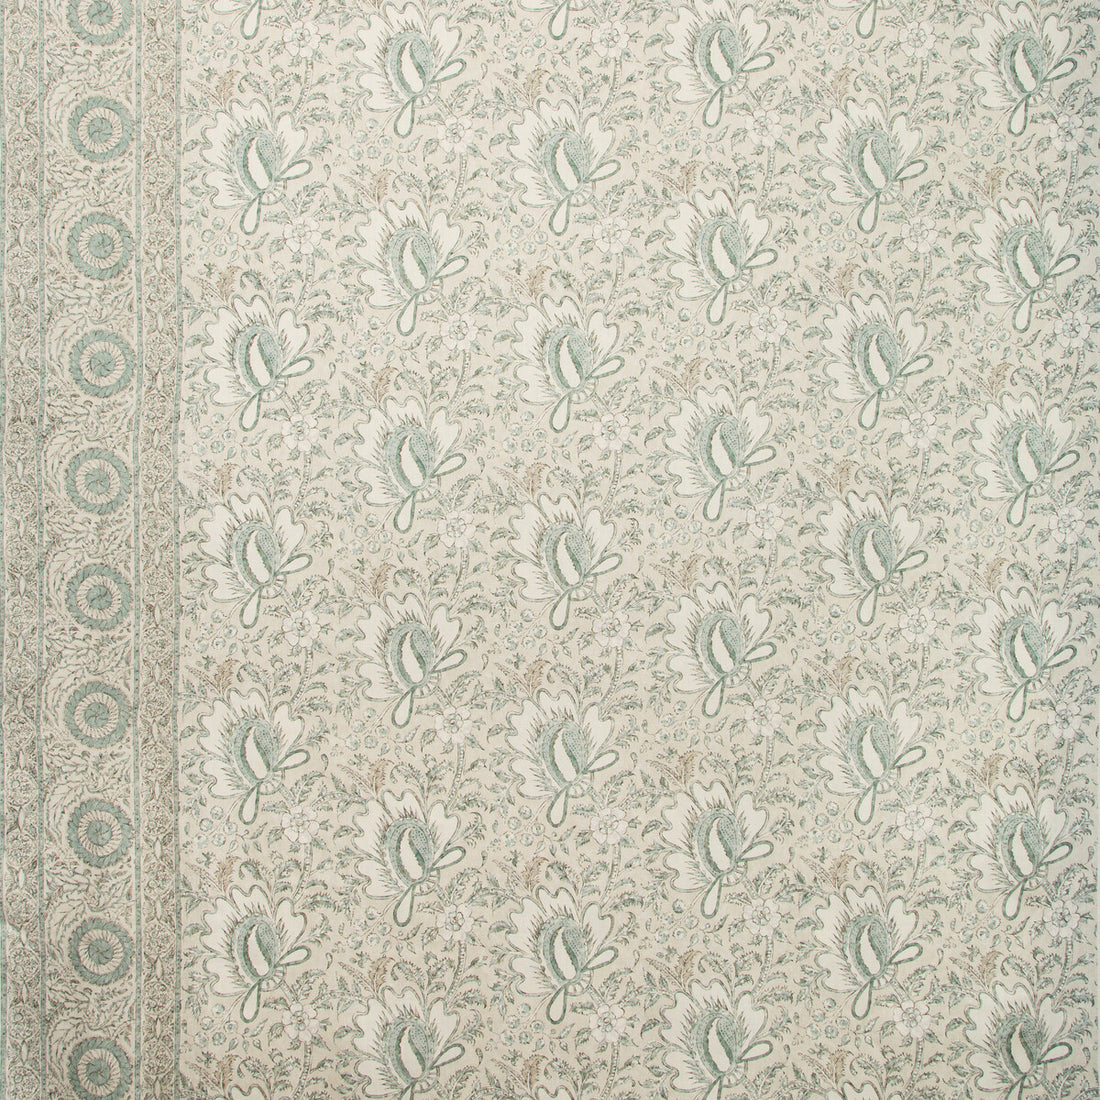 Dove Meadow fabric in lakeland color - pattern 2019150.13.0 - by Lee Jofa in the Carrier And Company collection